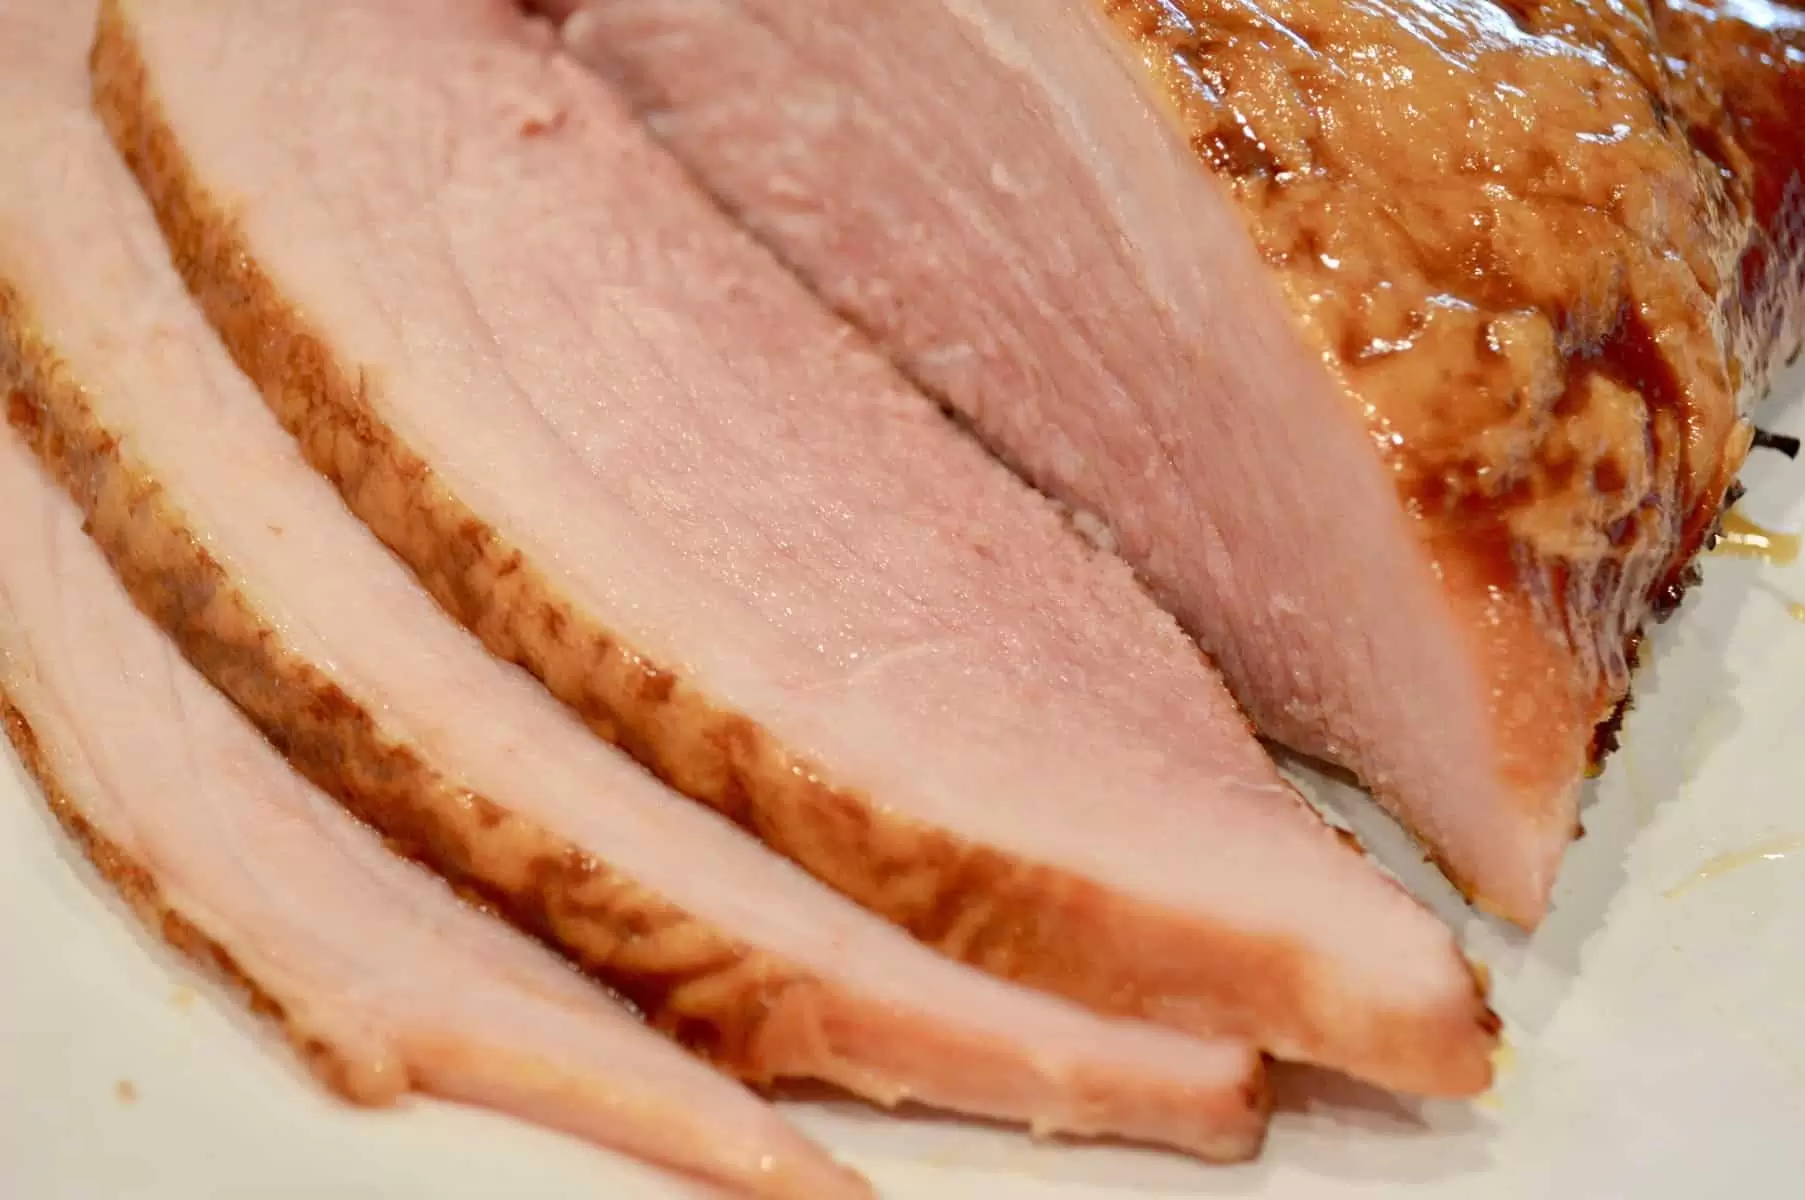 Slow Cooker Ham with Brown Sugar Glaze is so easy to make in your Crockpot! Best Brunch Recipes. This easy healthy recipe is great for the holidays, easter, or just during the week. So simple, makes great leftovers, and can be done with boneless or spiral sliced ham. #crockpot #slowcooker #ham #easyrecipe #easter #weeknightdinner #healthyrecipe #simple #leftovers